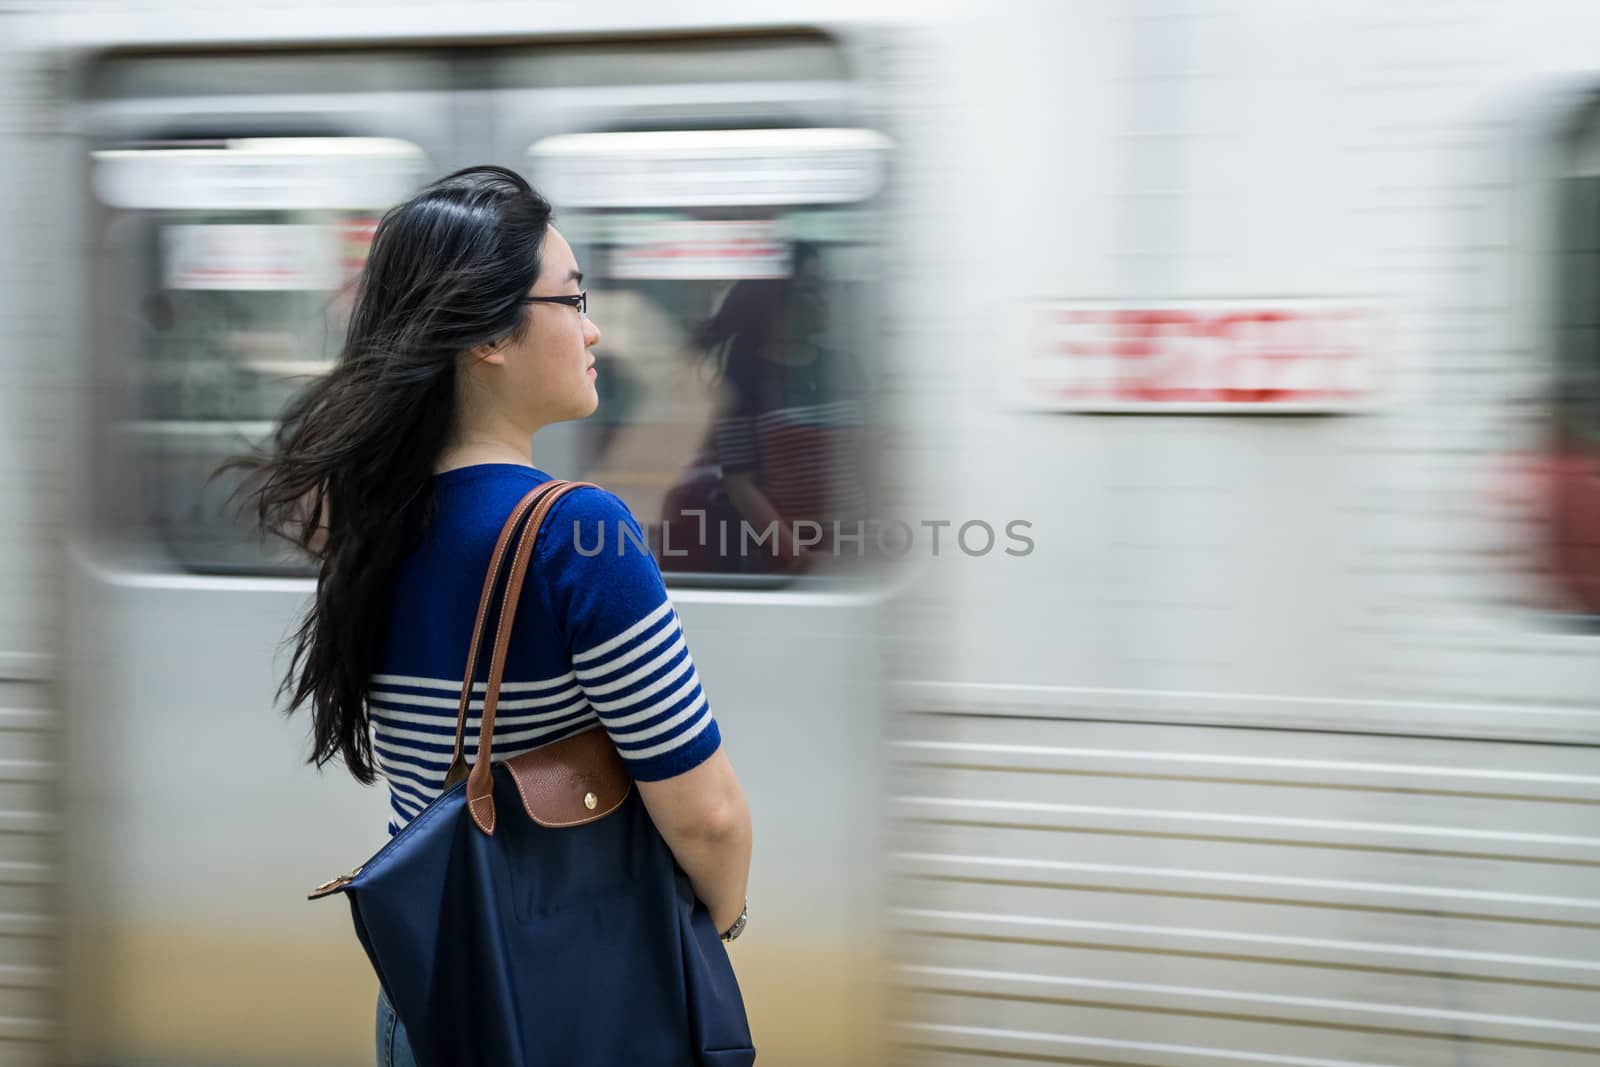 Young woman waiting at subway station with moving train